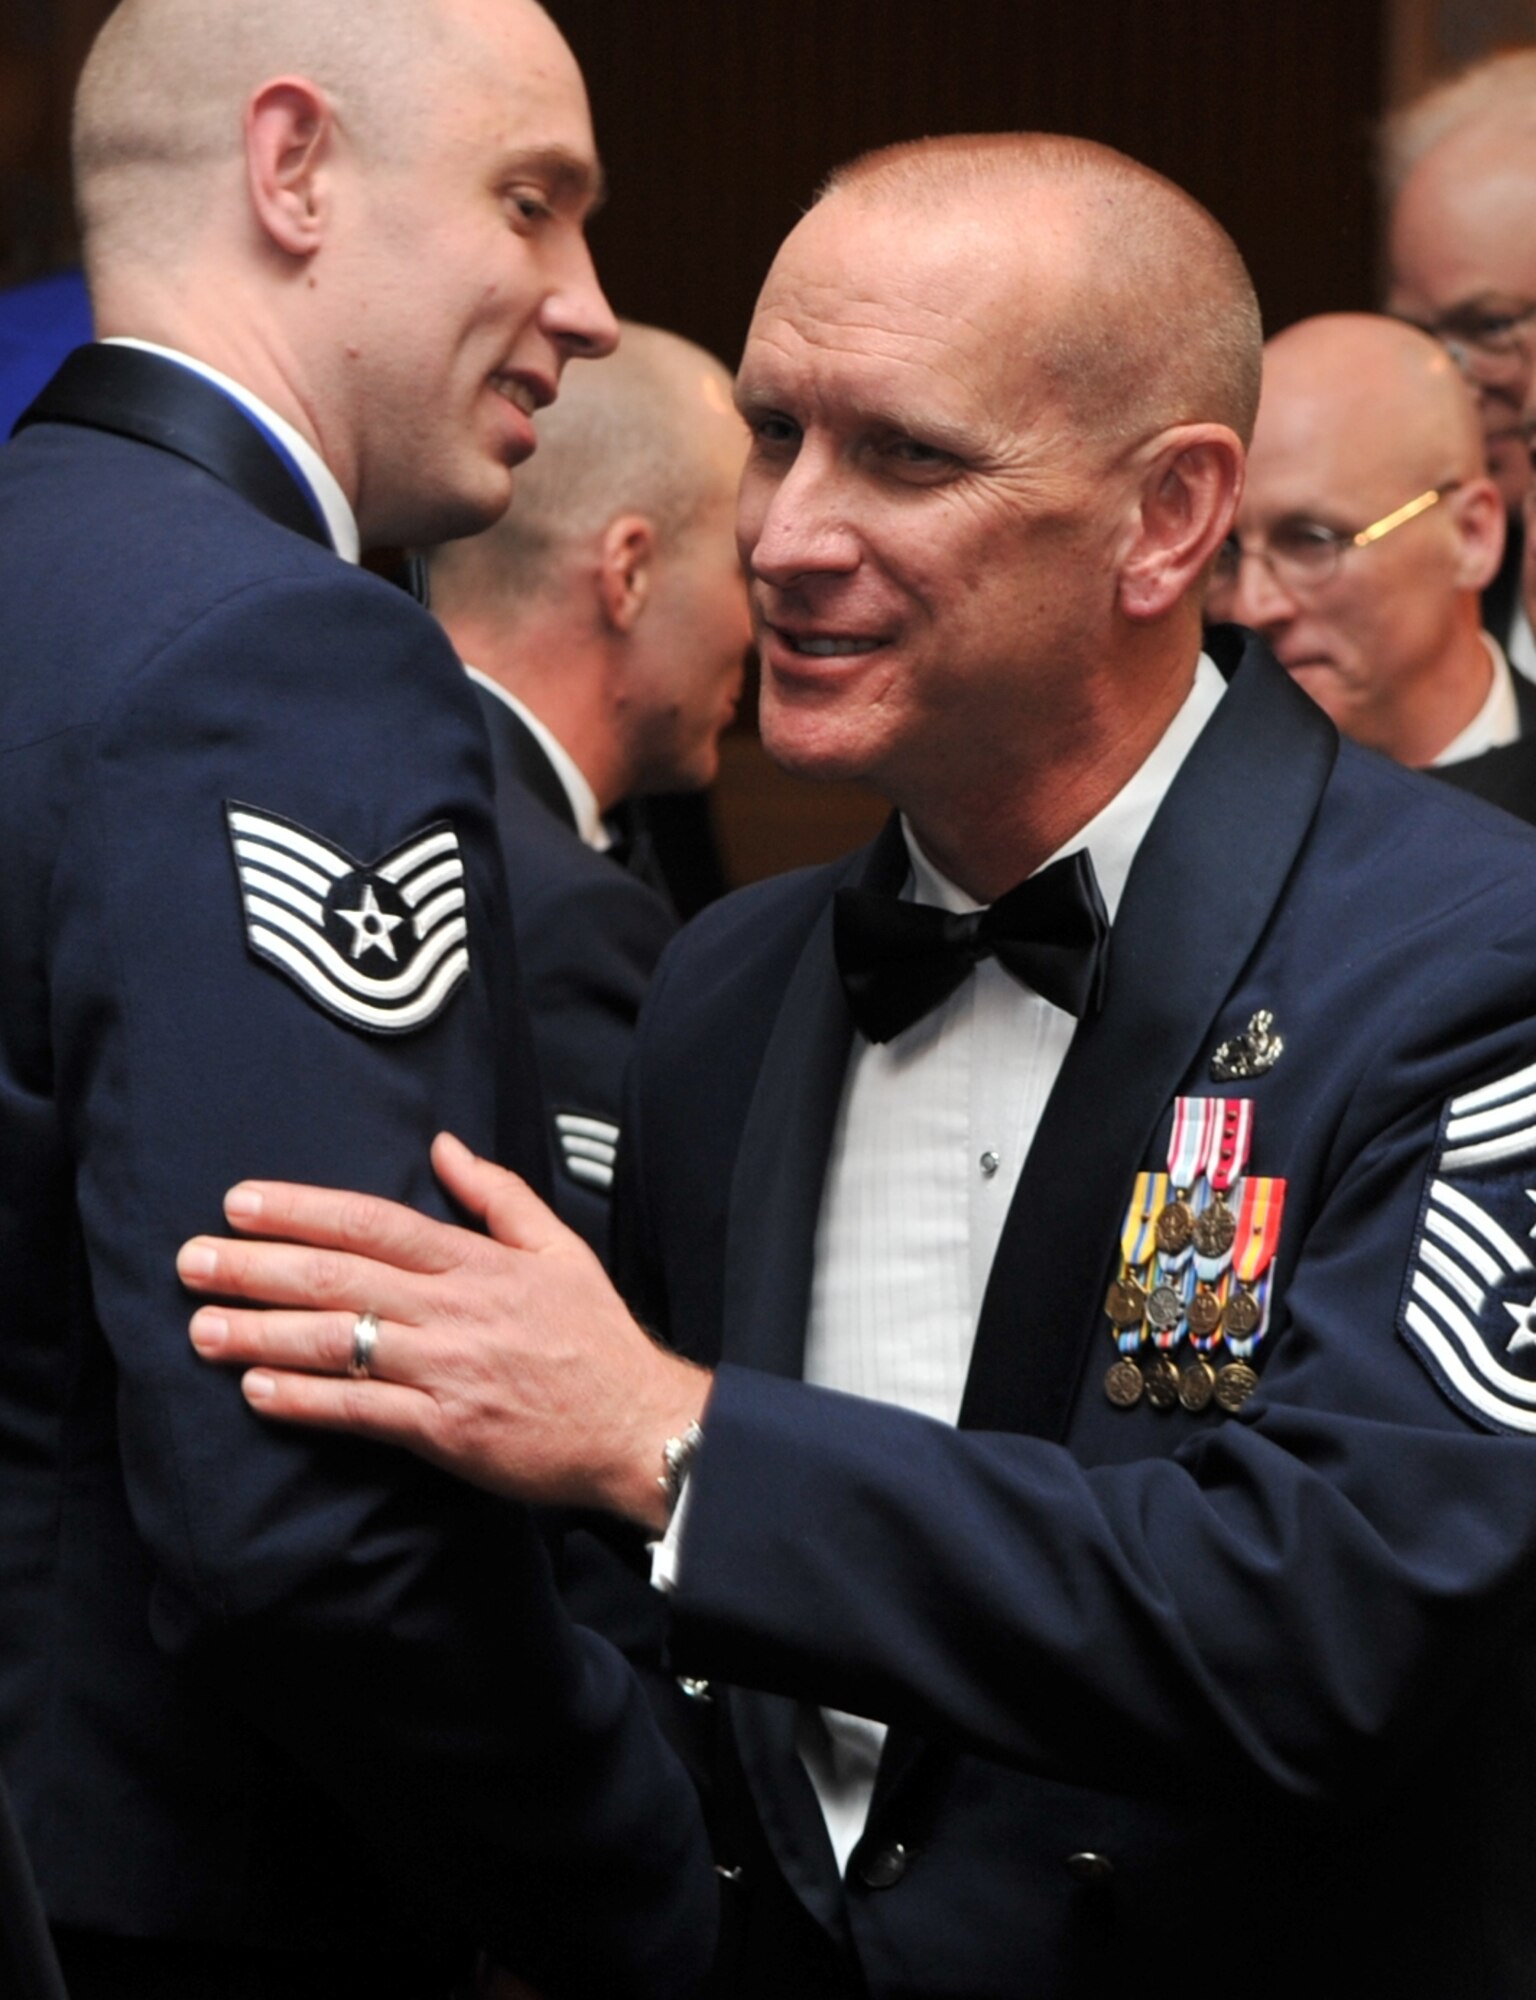 Chief Master Sgt. Brian Hornback, command chief for Air Force Global Strike
Command, congratulates Outstanding Non-Commissioned Officer of the Year,
Tech. Sgt. Bradley Williams, the acting first sergeant for the 5th Logistics
Readiness Squadron at Minot Air Force Base, N.D. Sergeant Williams was
recognized at the command's Outstanding Airmen of the Year banquet in
Shreveport, La., March 24. The Airmen will go on to compete at Air Force
level to become the 12 Outstanding Airmen of the Year.  (U.S. Air Force
photo/Airman 1st Class Micaiah Anthony)
